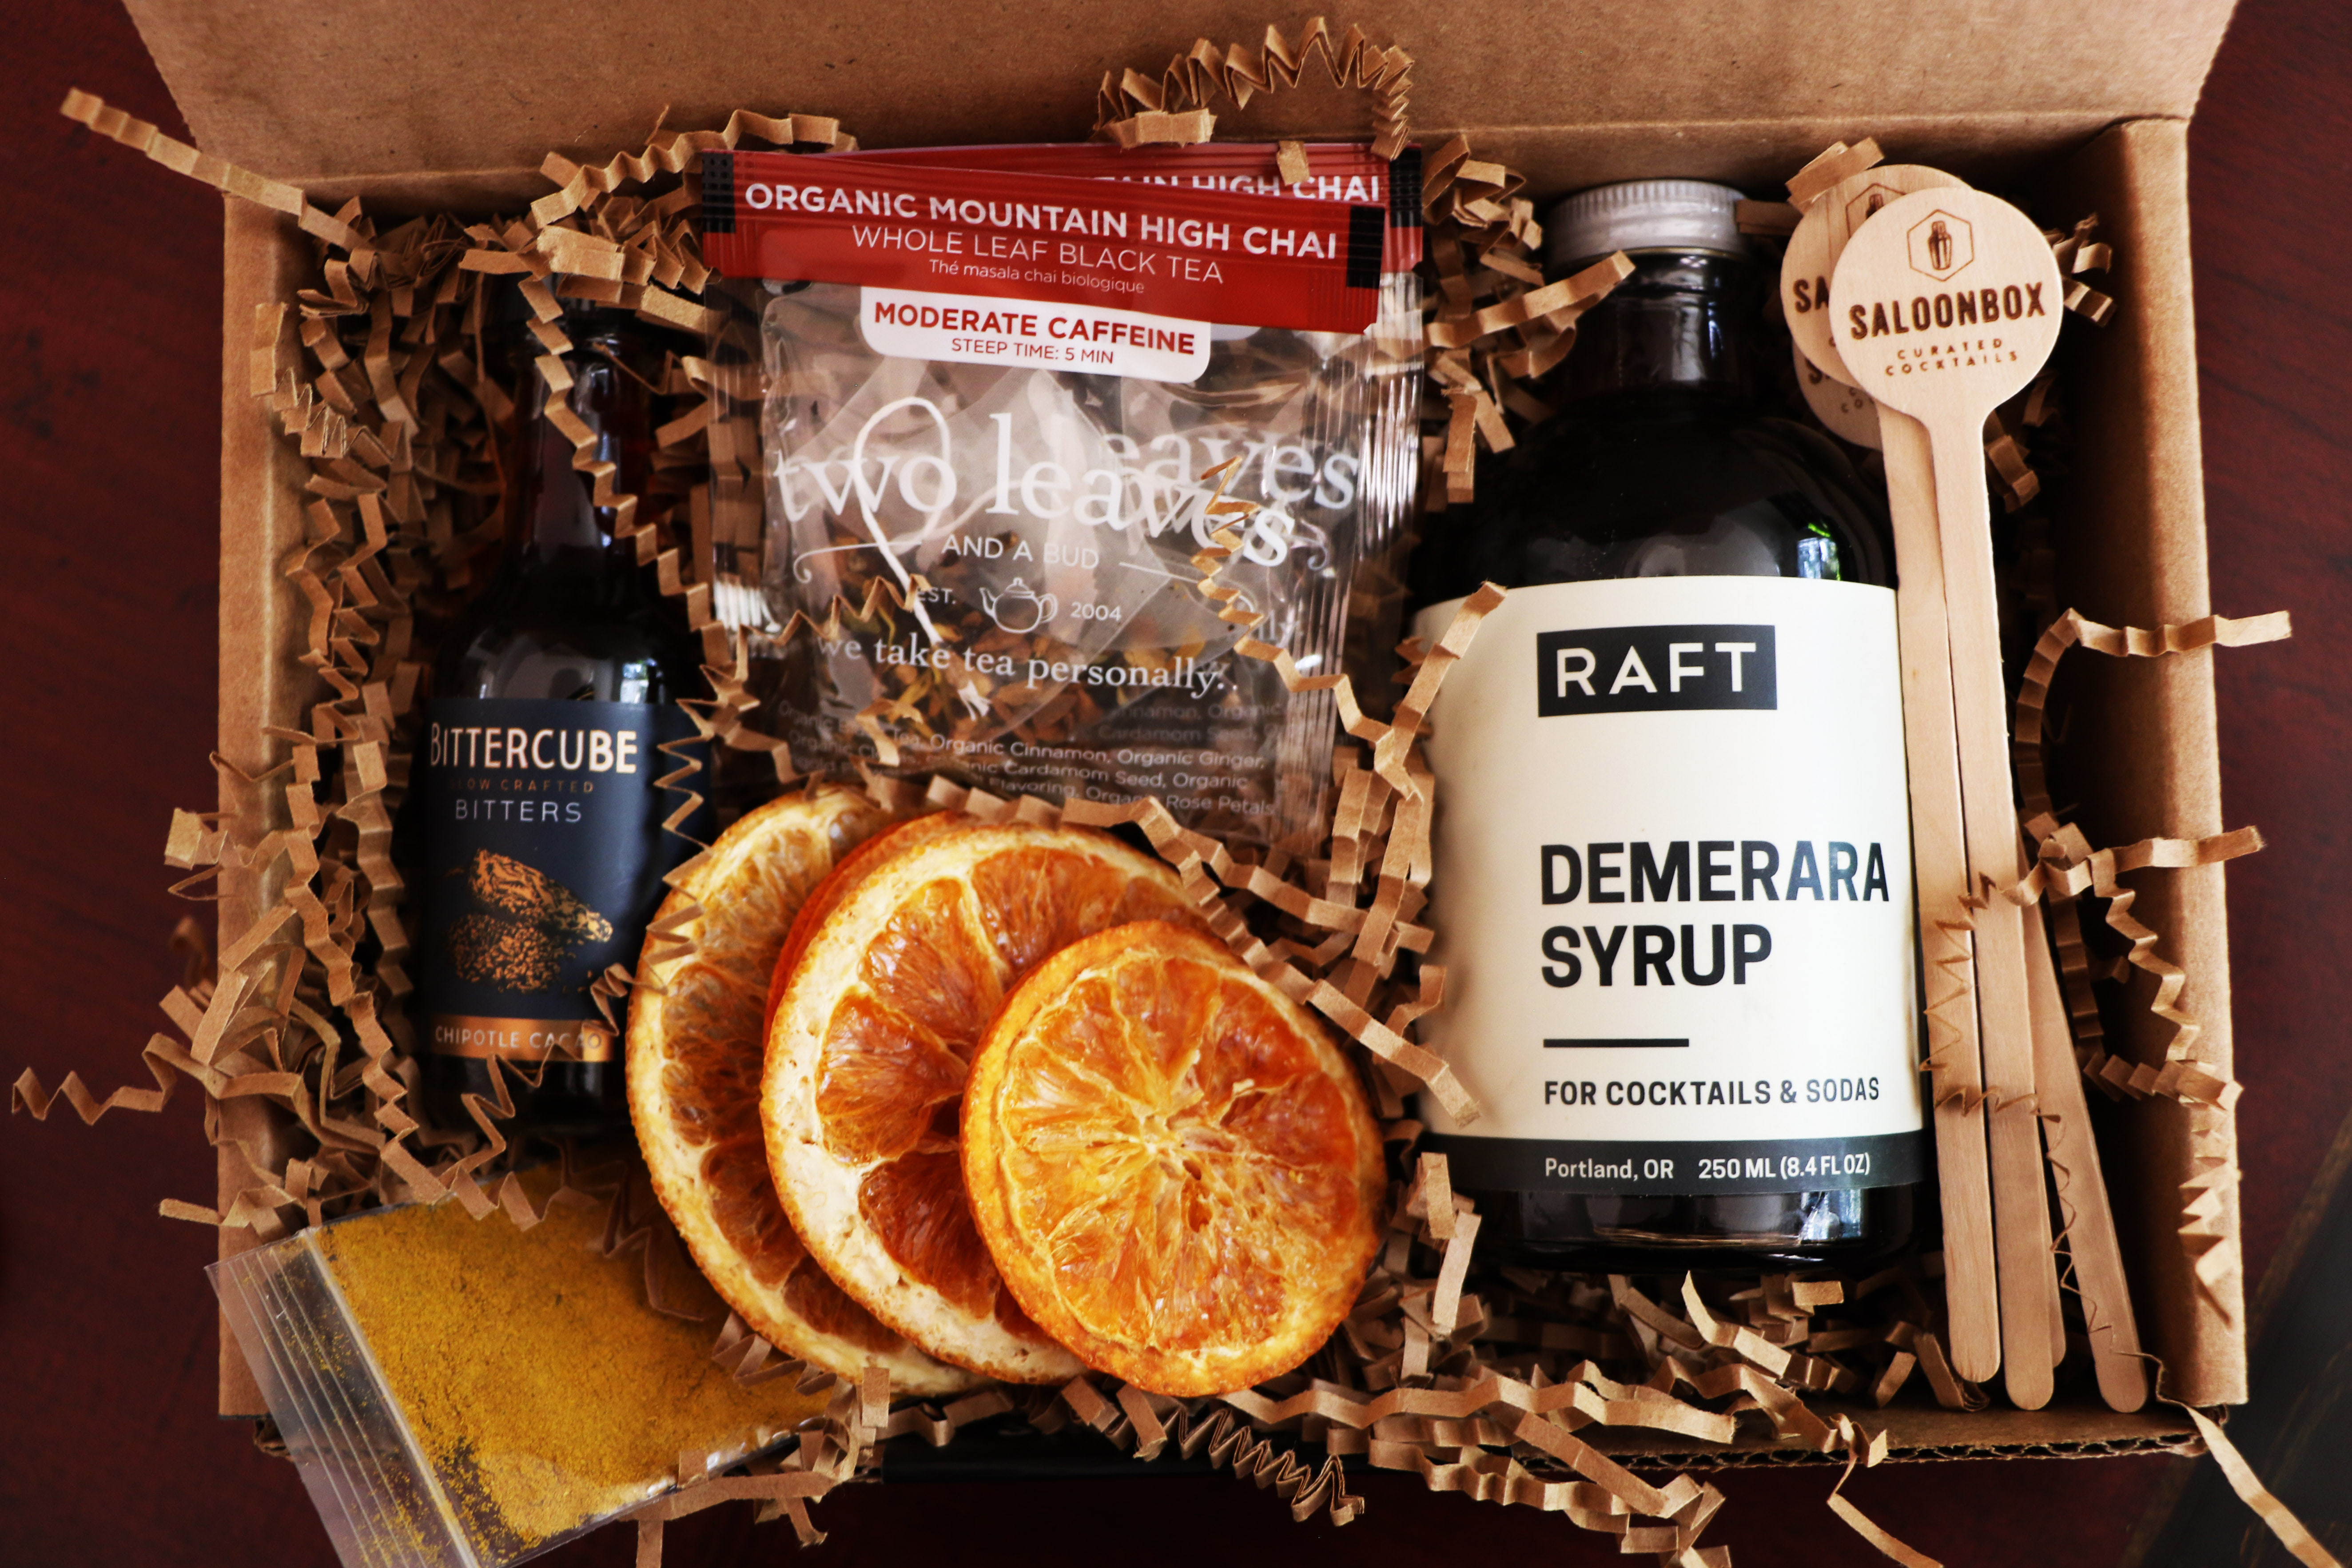 West Indian Old Fashioned Cocktail Kit featuring Santa Teresa 1796